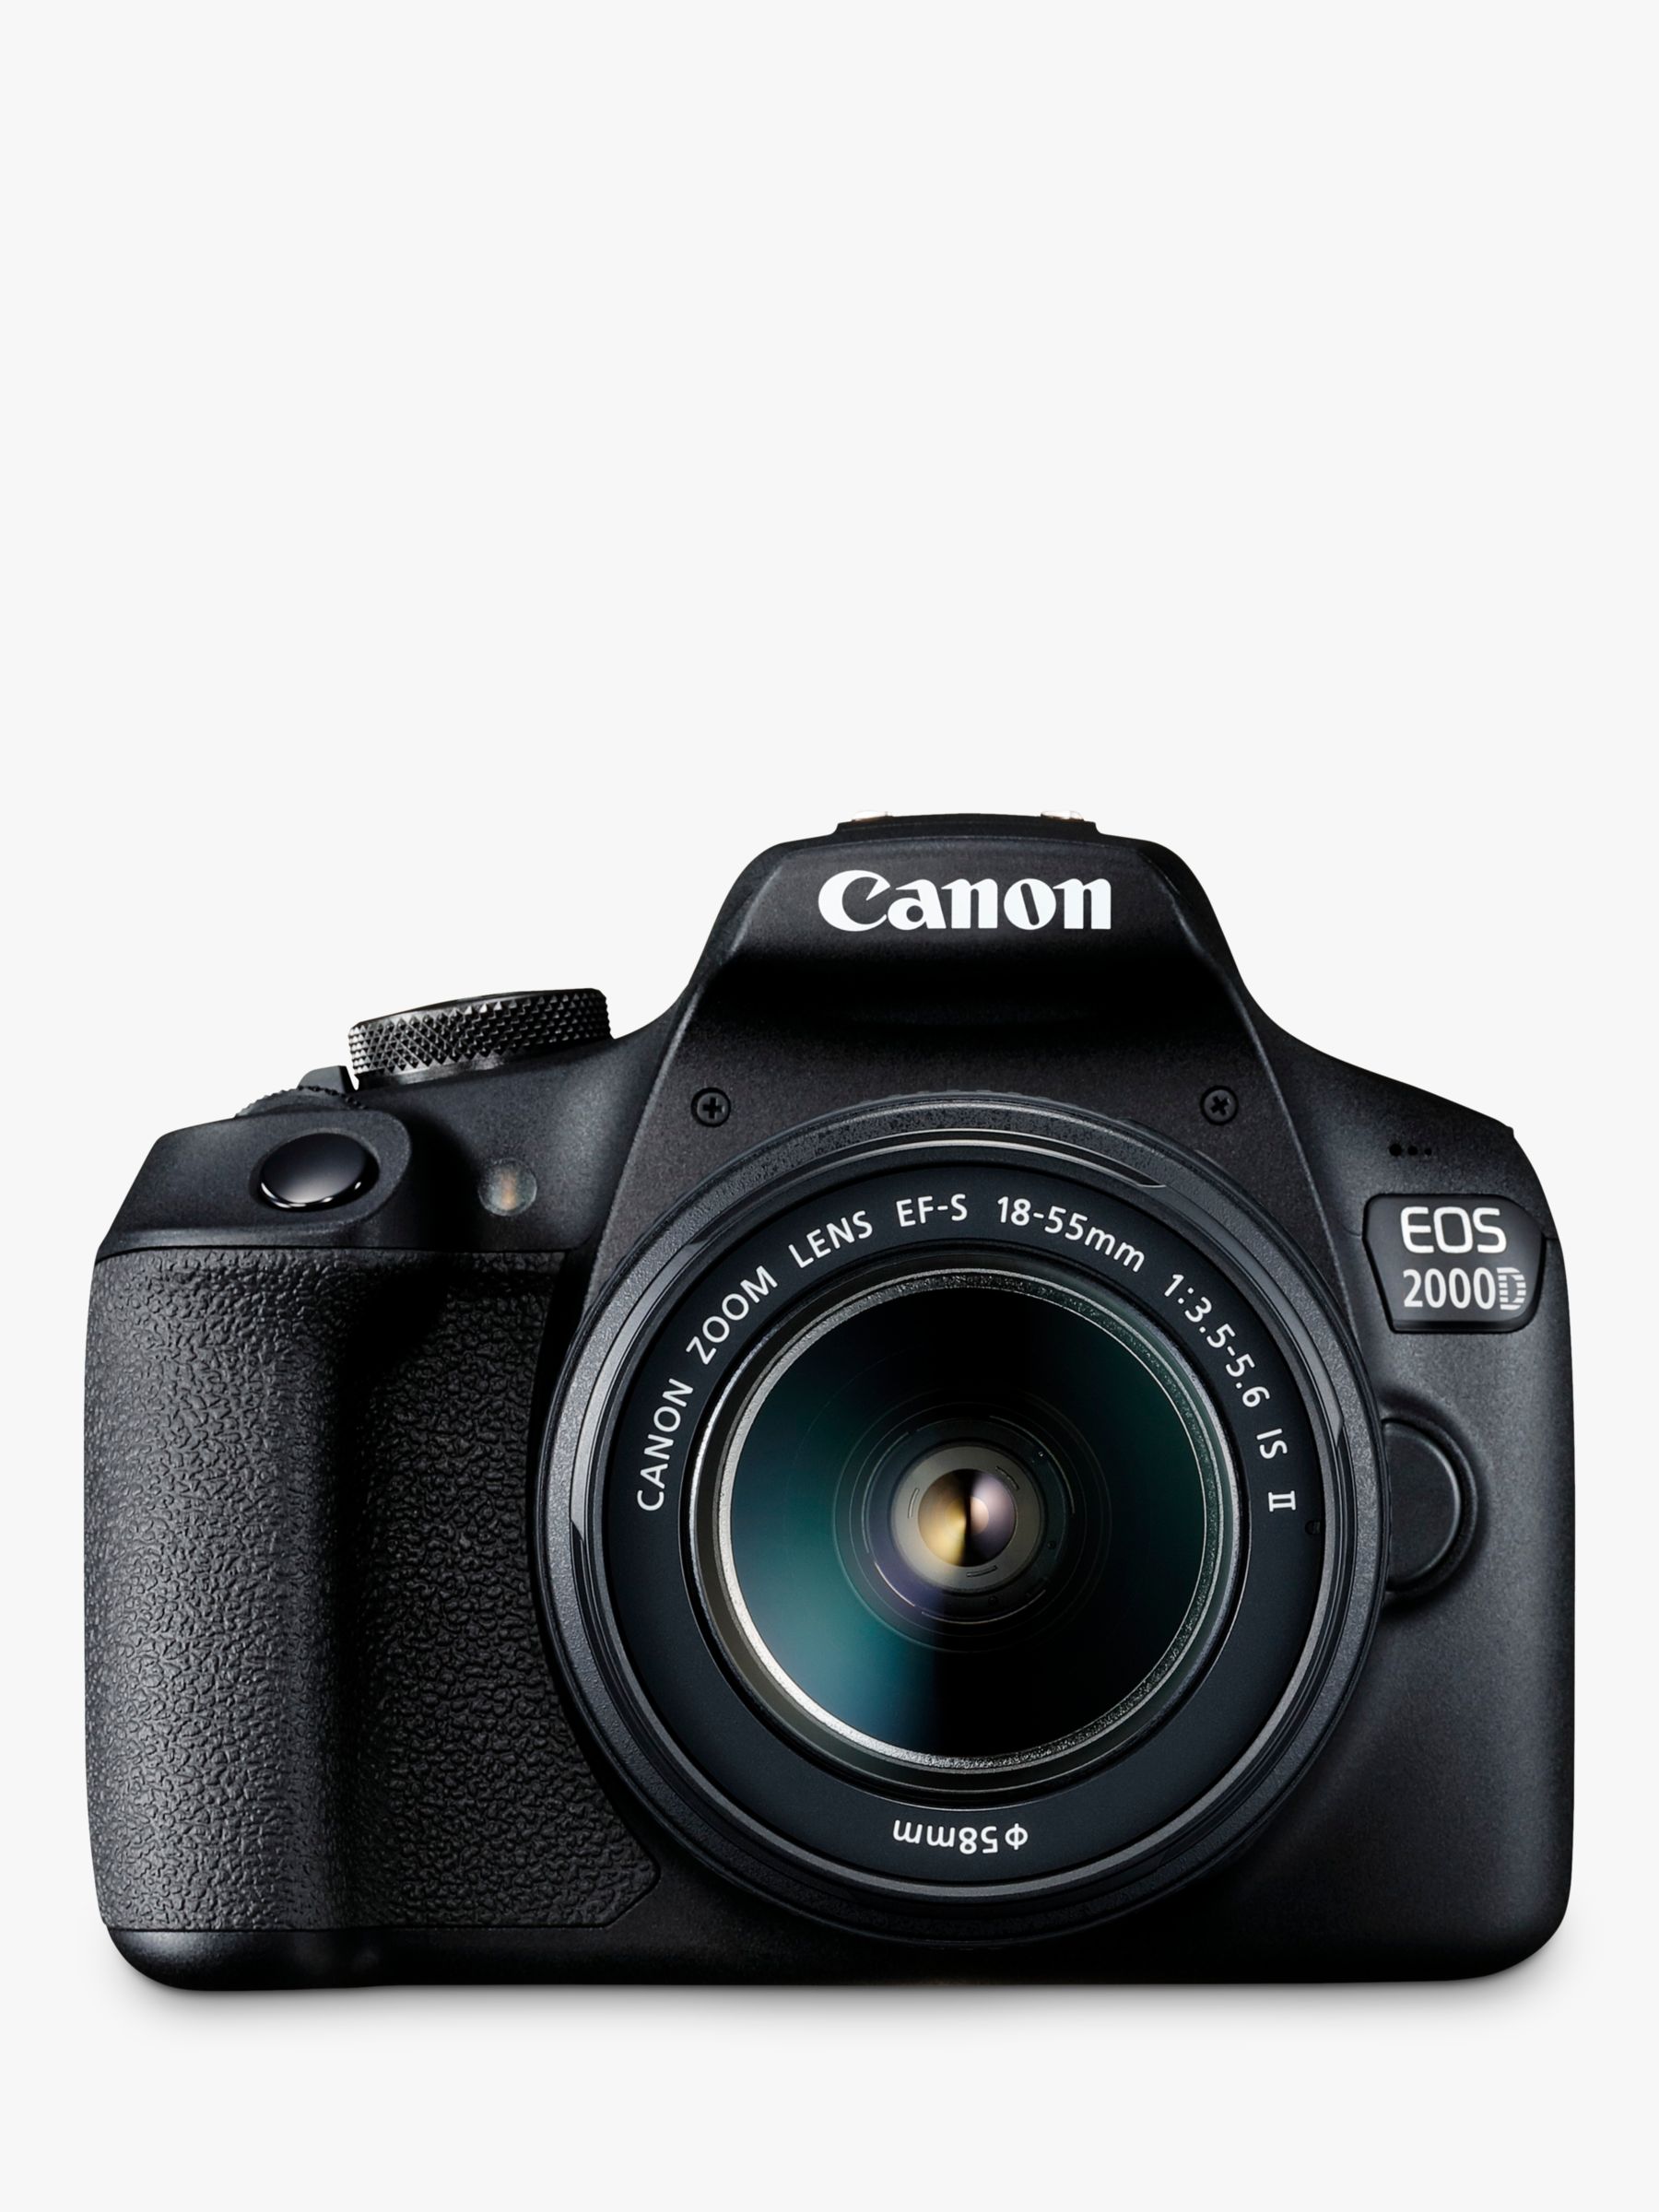 Canon EOS 2000D Digital SLR Camera with 18-55mm f/3.5-5.6 IS Lens, 1080p Full HD, 24.1MP, Wi-Fi, NFC, Optical Viewfinder, 3 LCD Screen, Black